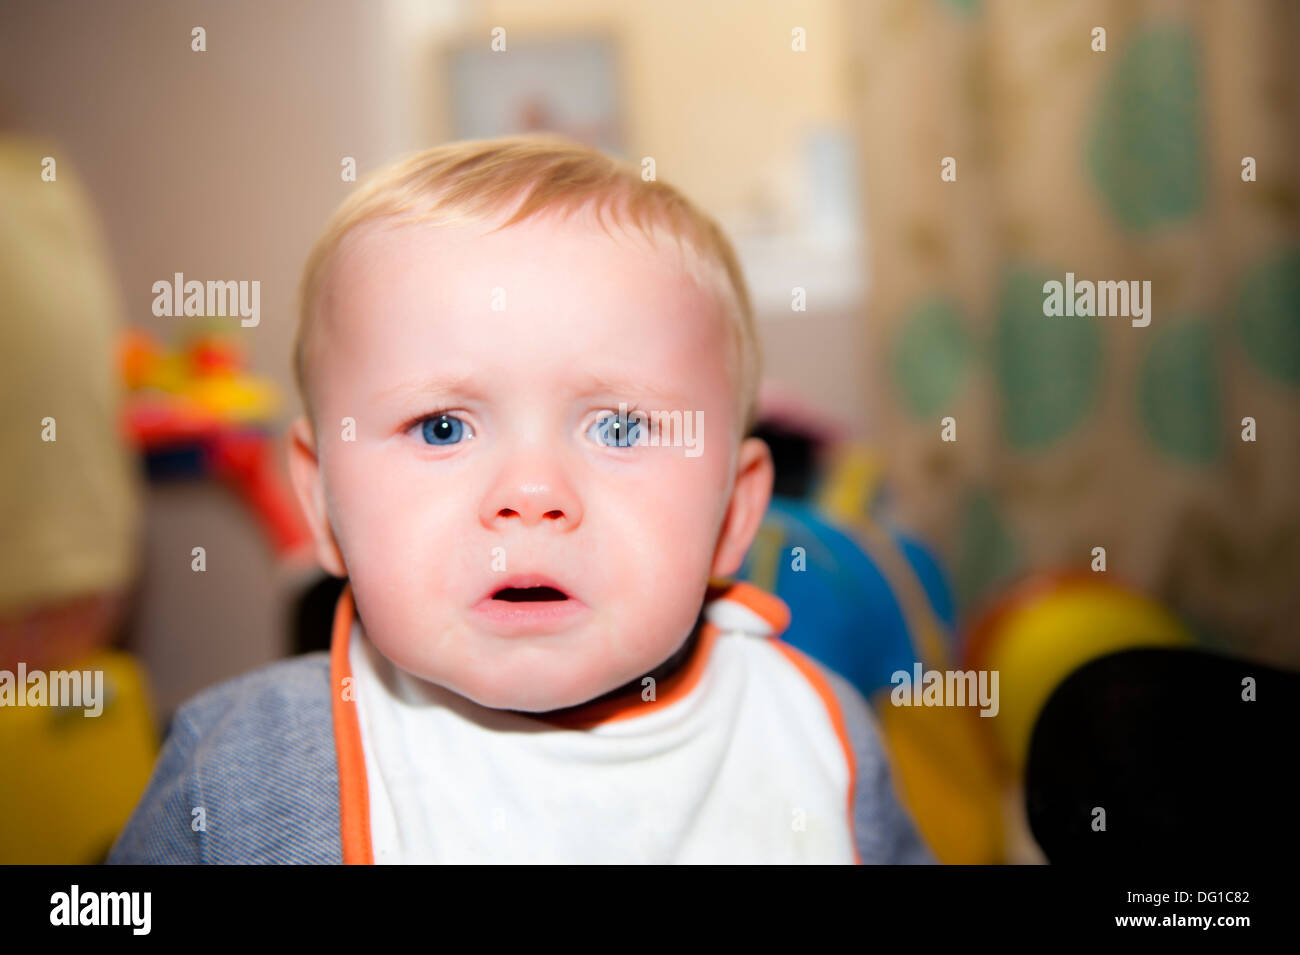 Baby Boy looking at camera with expression triste Banque D'Images